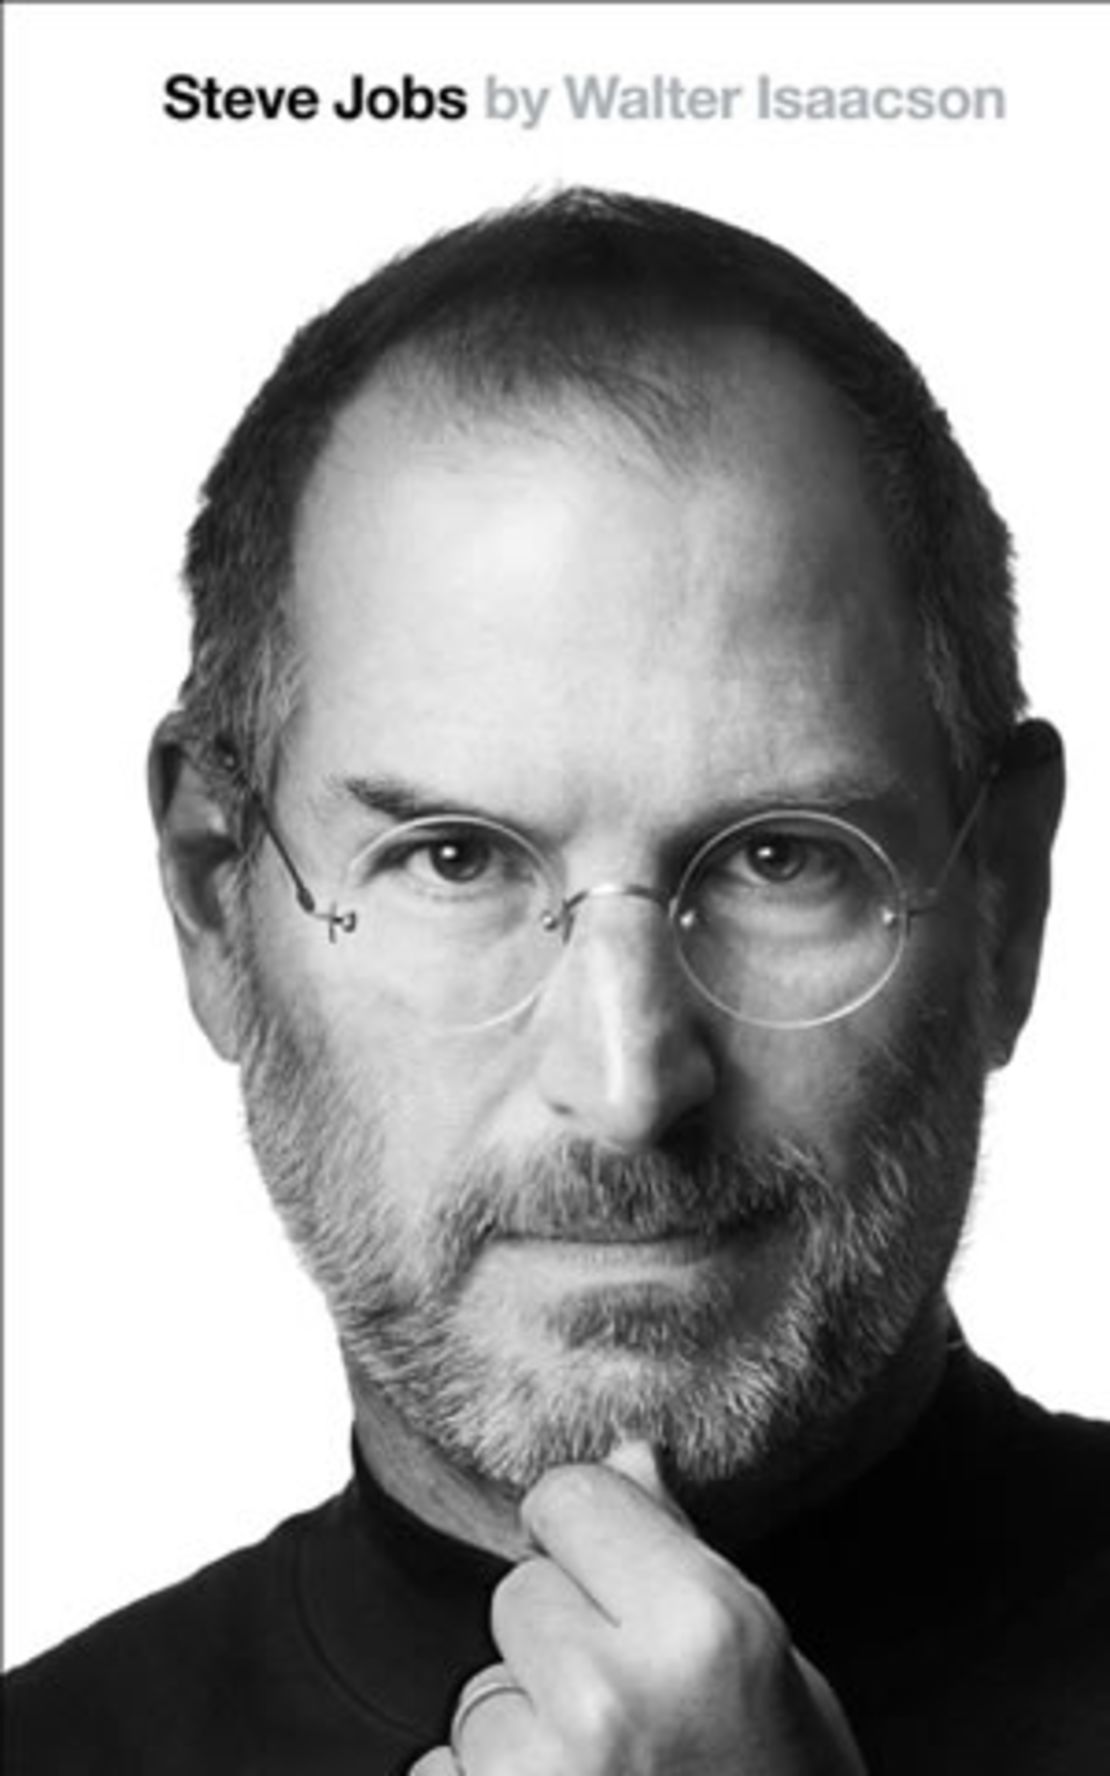 "Steve Jobs" is a candid, unvarnished biography of the late Apple co-founder.